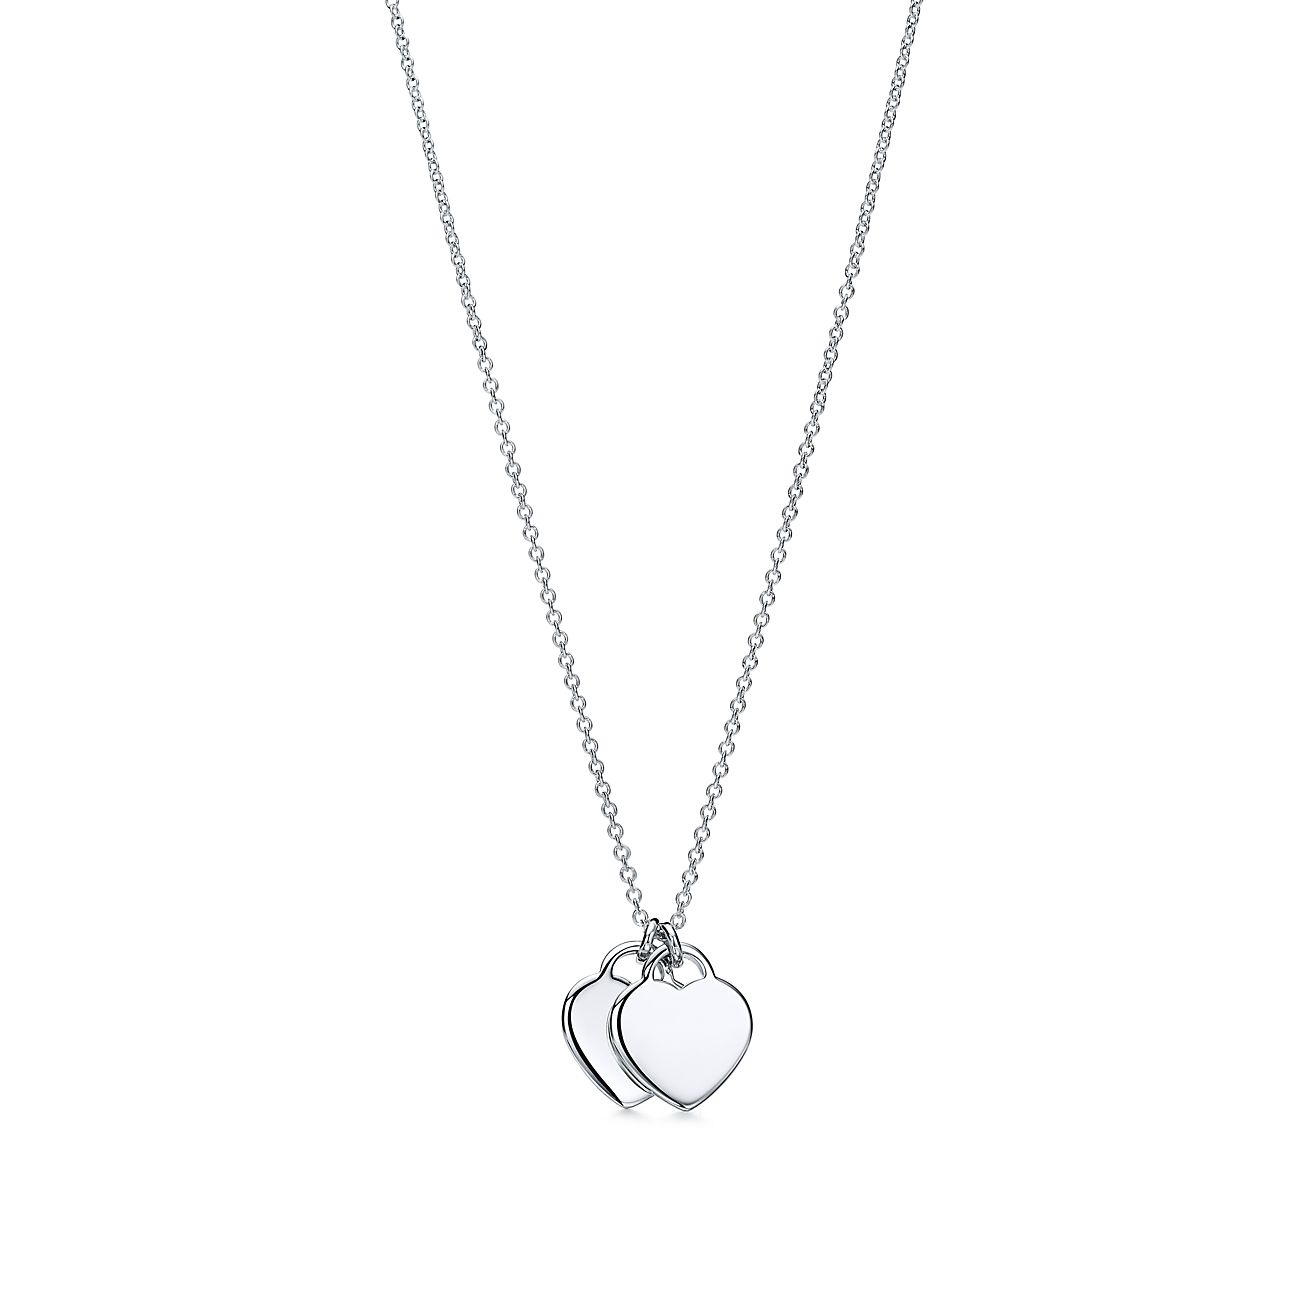 Return to Tiffany® Love You Heart Tag Pendant in Silver and Tiffany Blue®